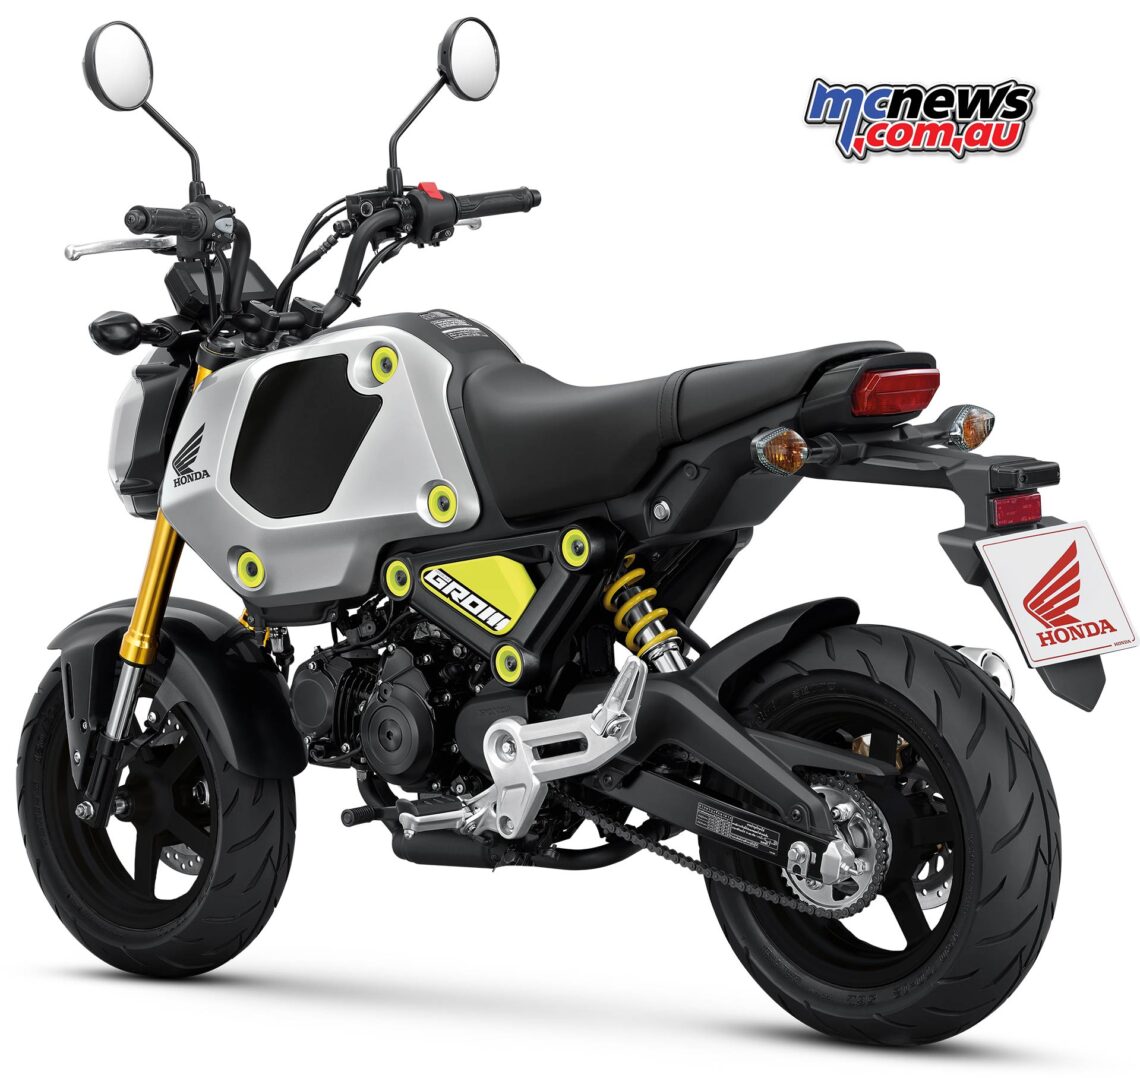 New engine and new look for 2021 Honda Grom | MCNews